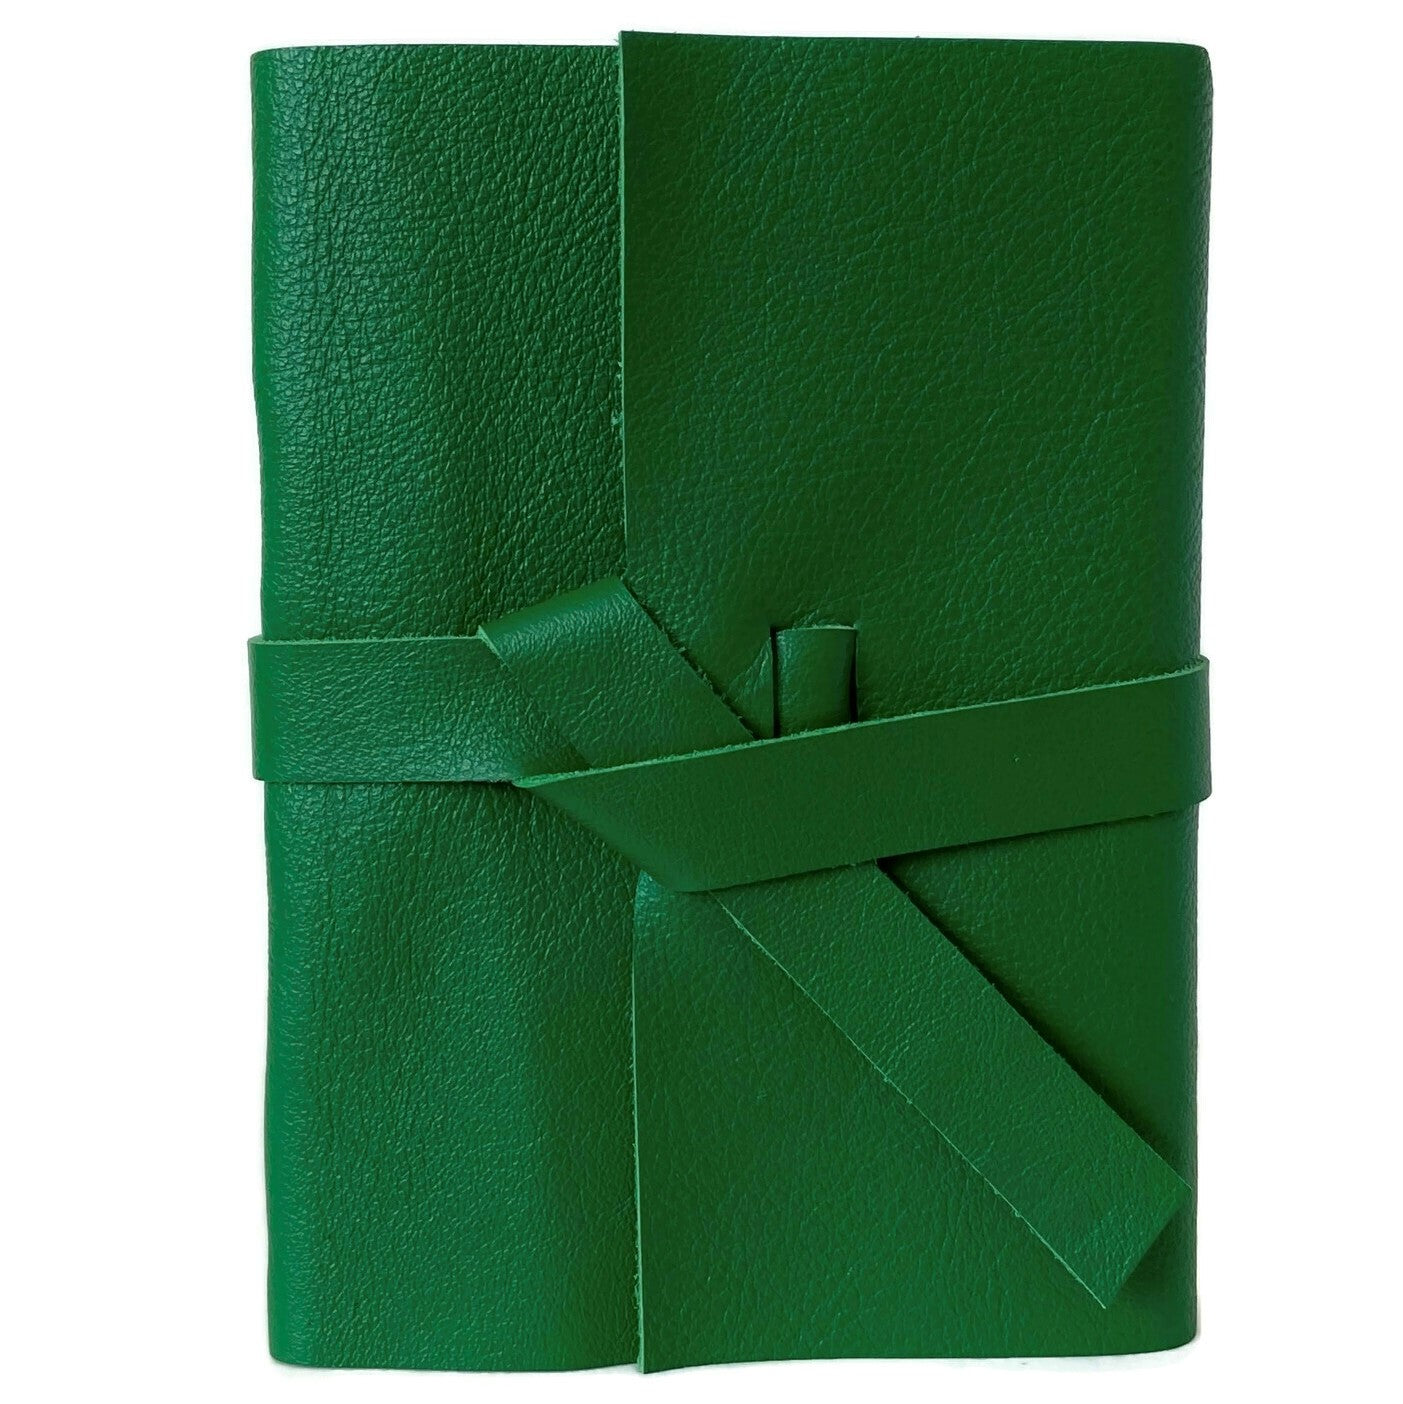 Green Slim Leather Travel Journal, 96 pages